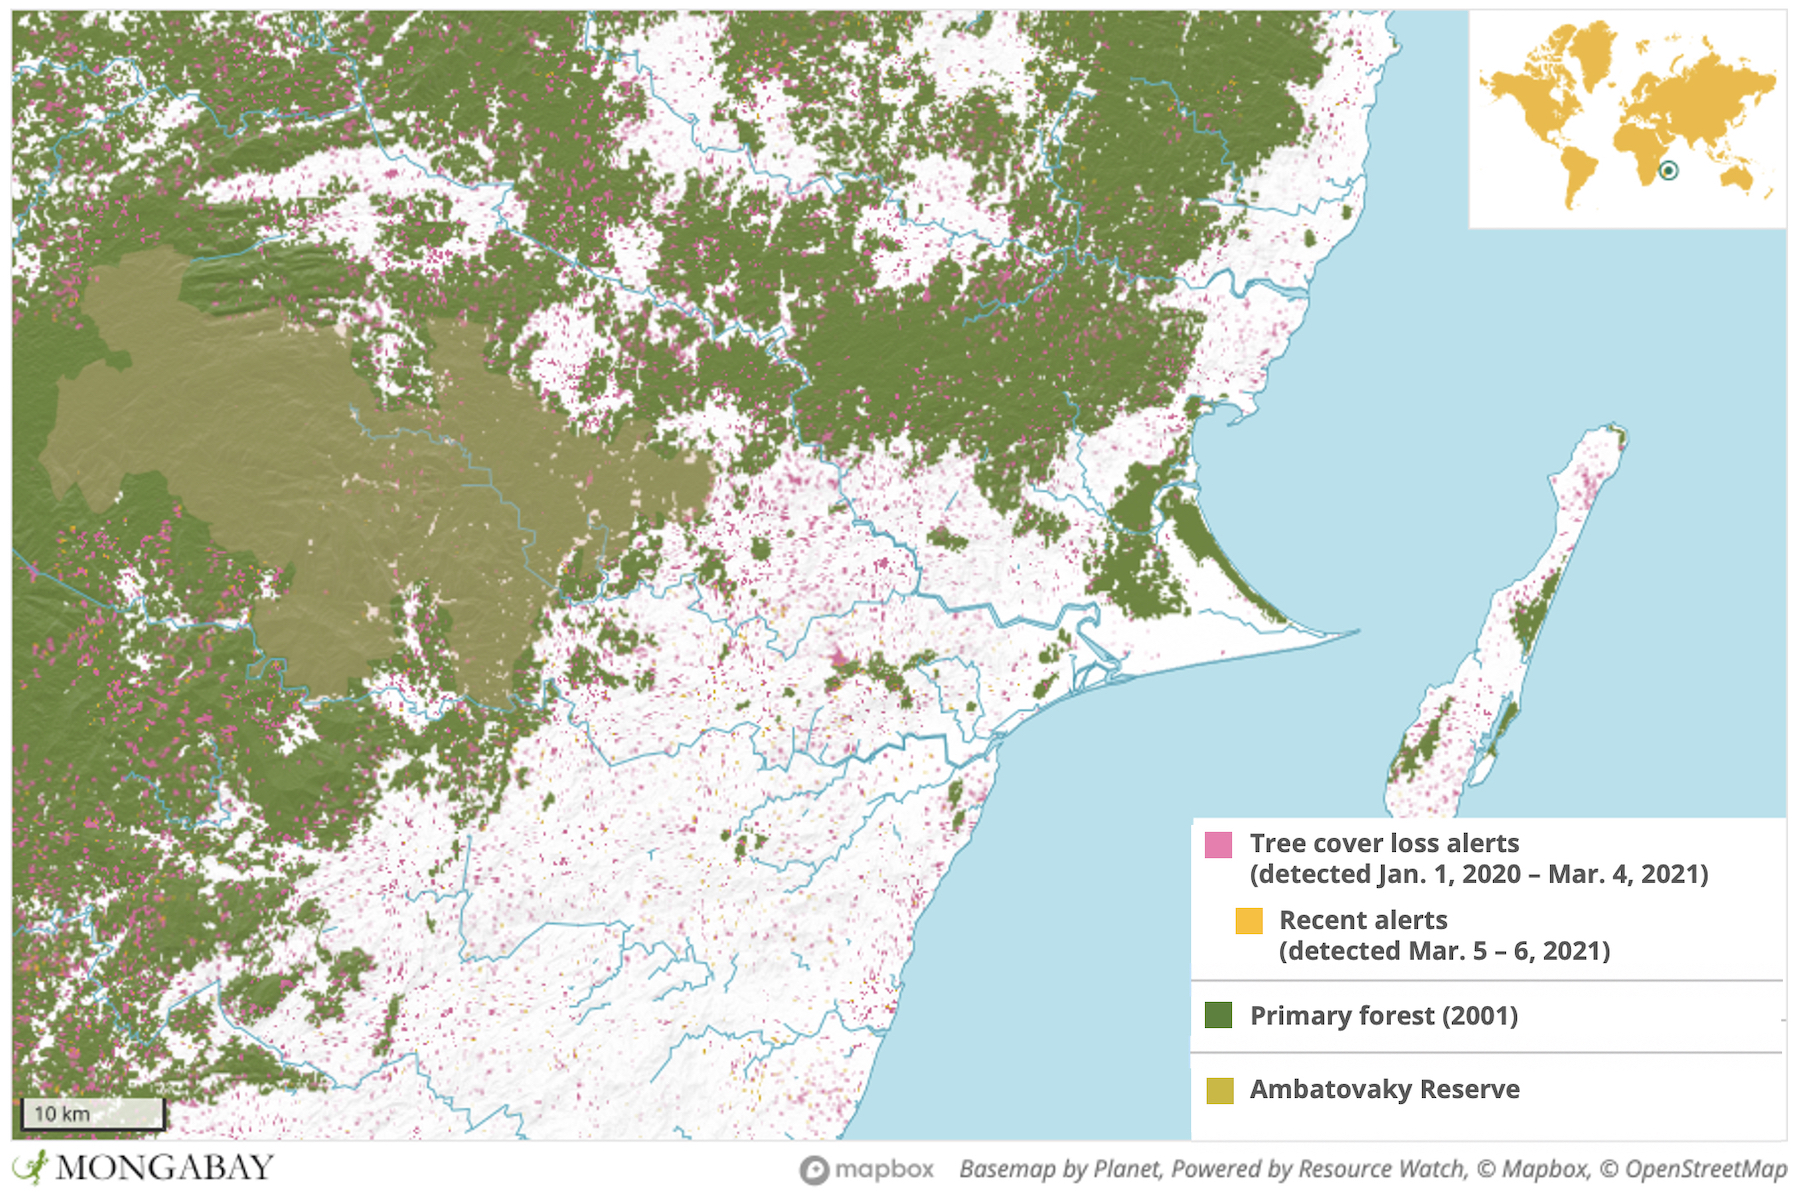 Satellite data from the University of Maryland show Ambatovaky experienced a surge in deforestation in 2020.